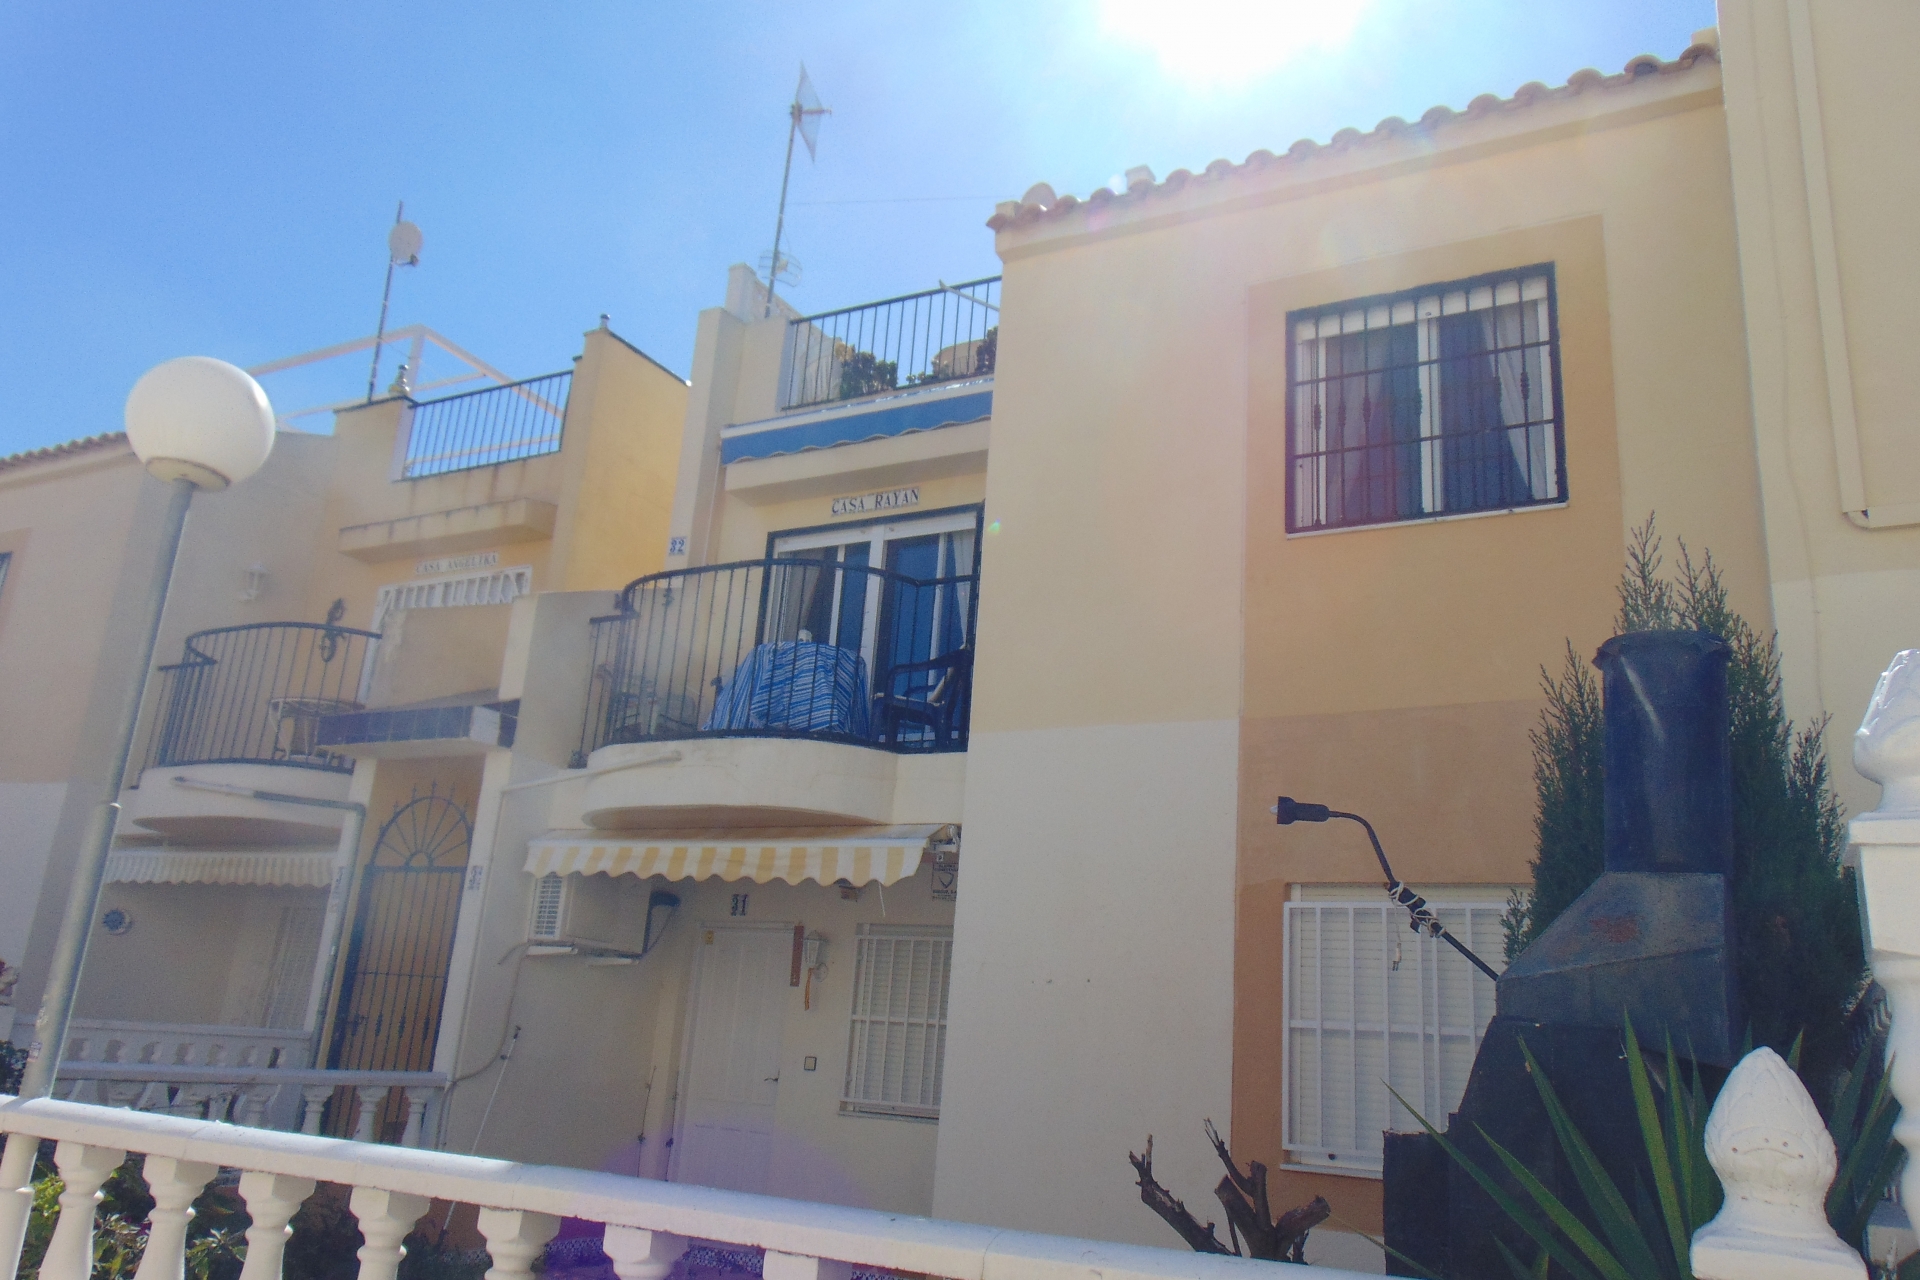 Property on Hold - Bungalow for sale - Torrevieja - El Chaparral